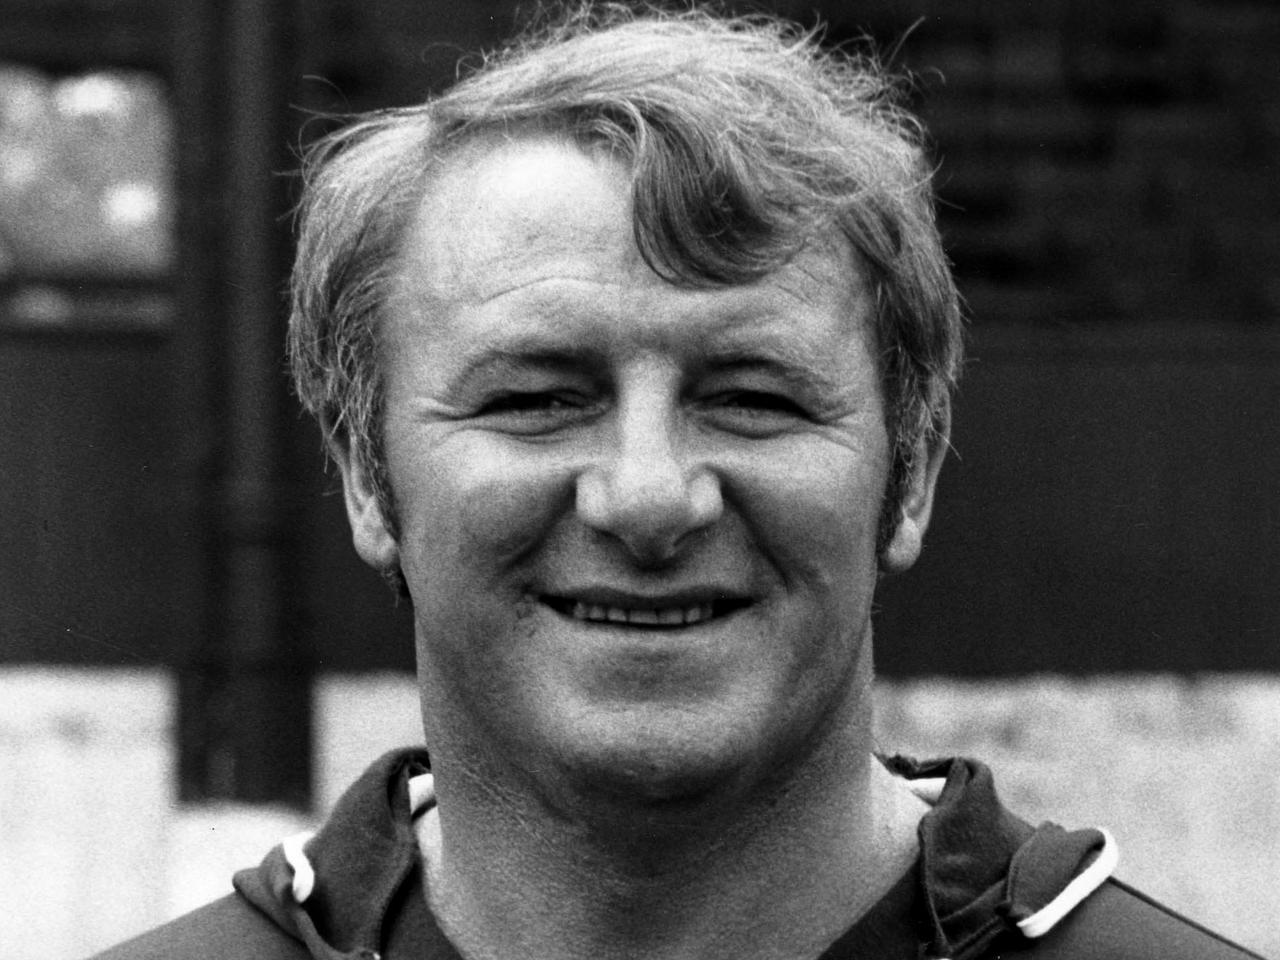 Obituary for former Man Utd manager Tommy Docherty | Manchester United